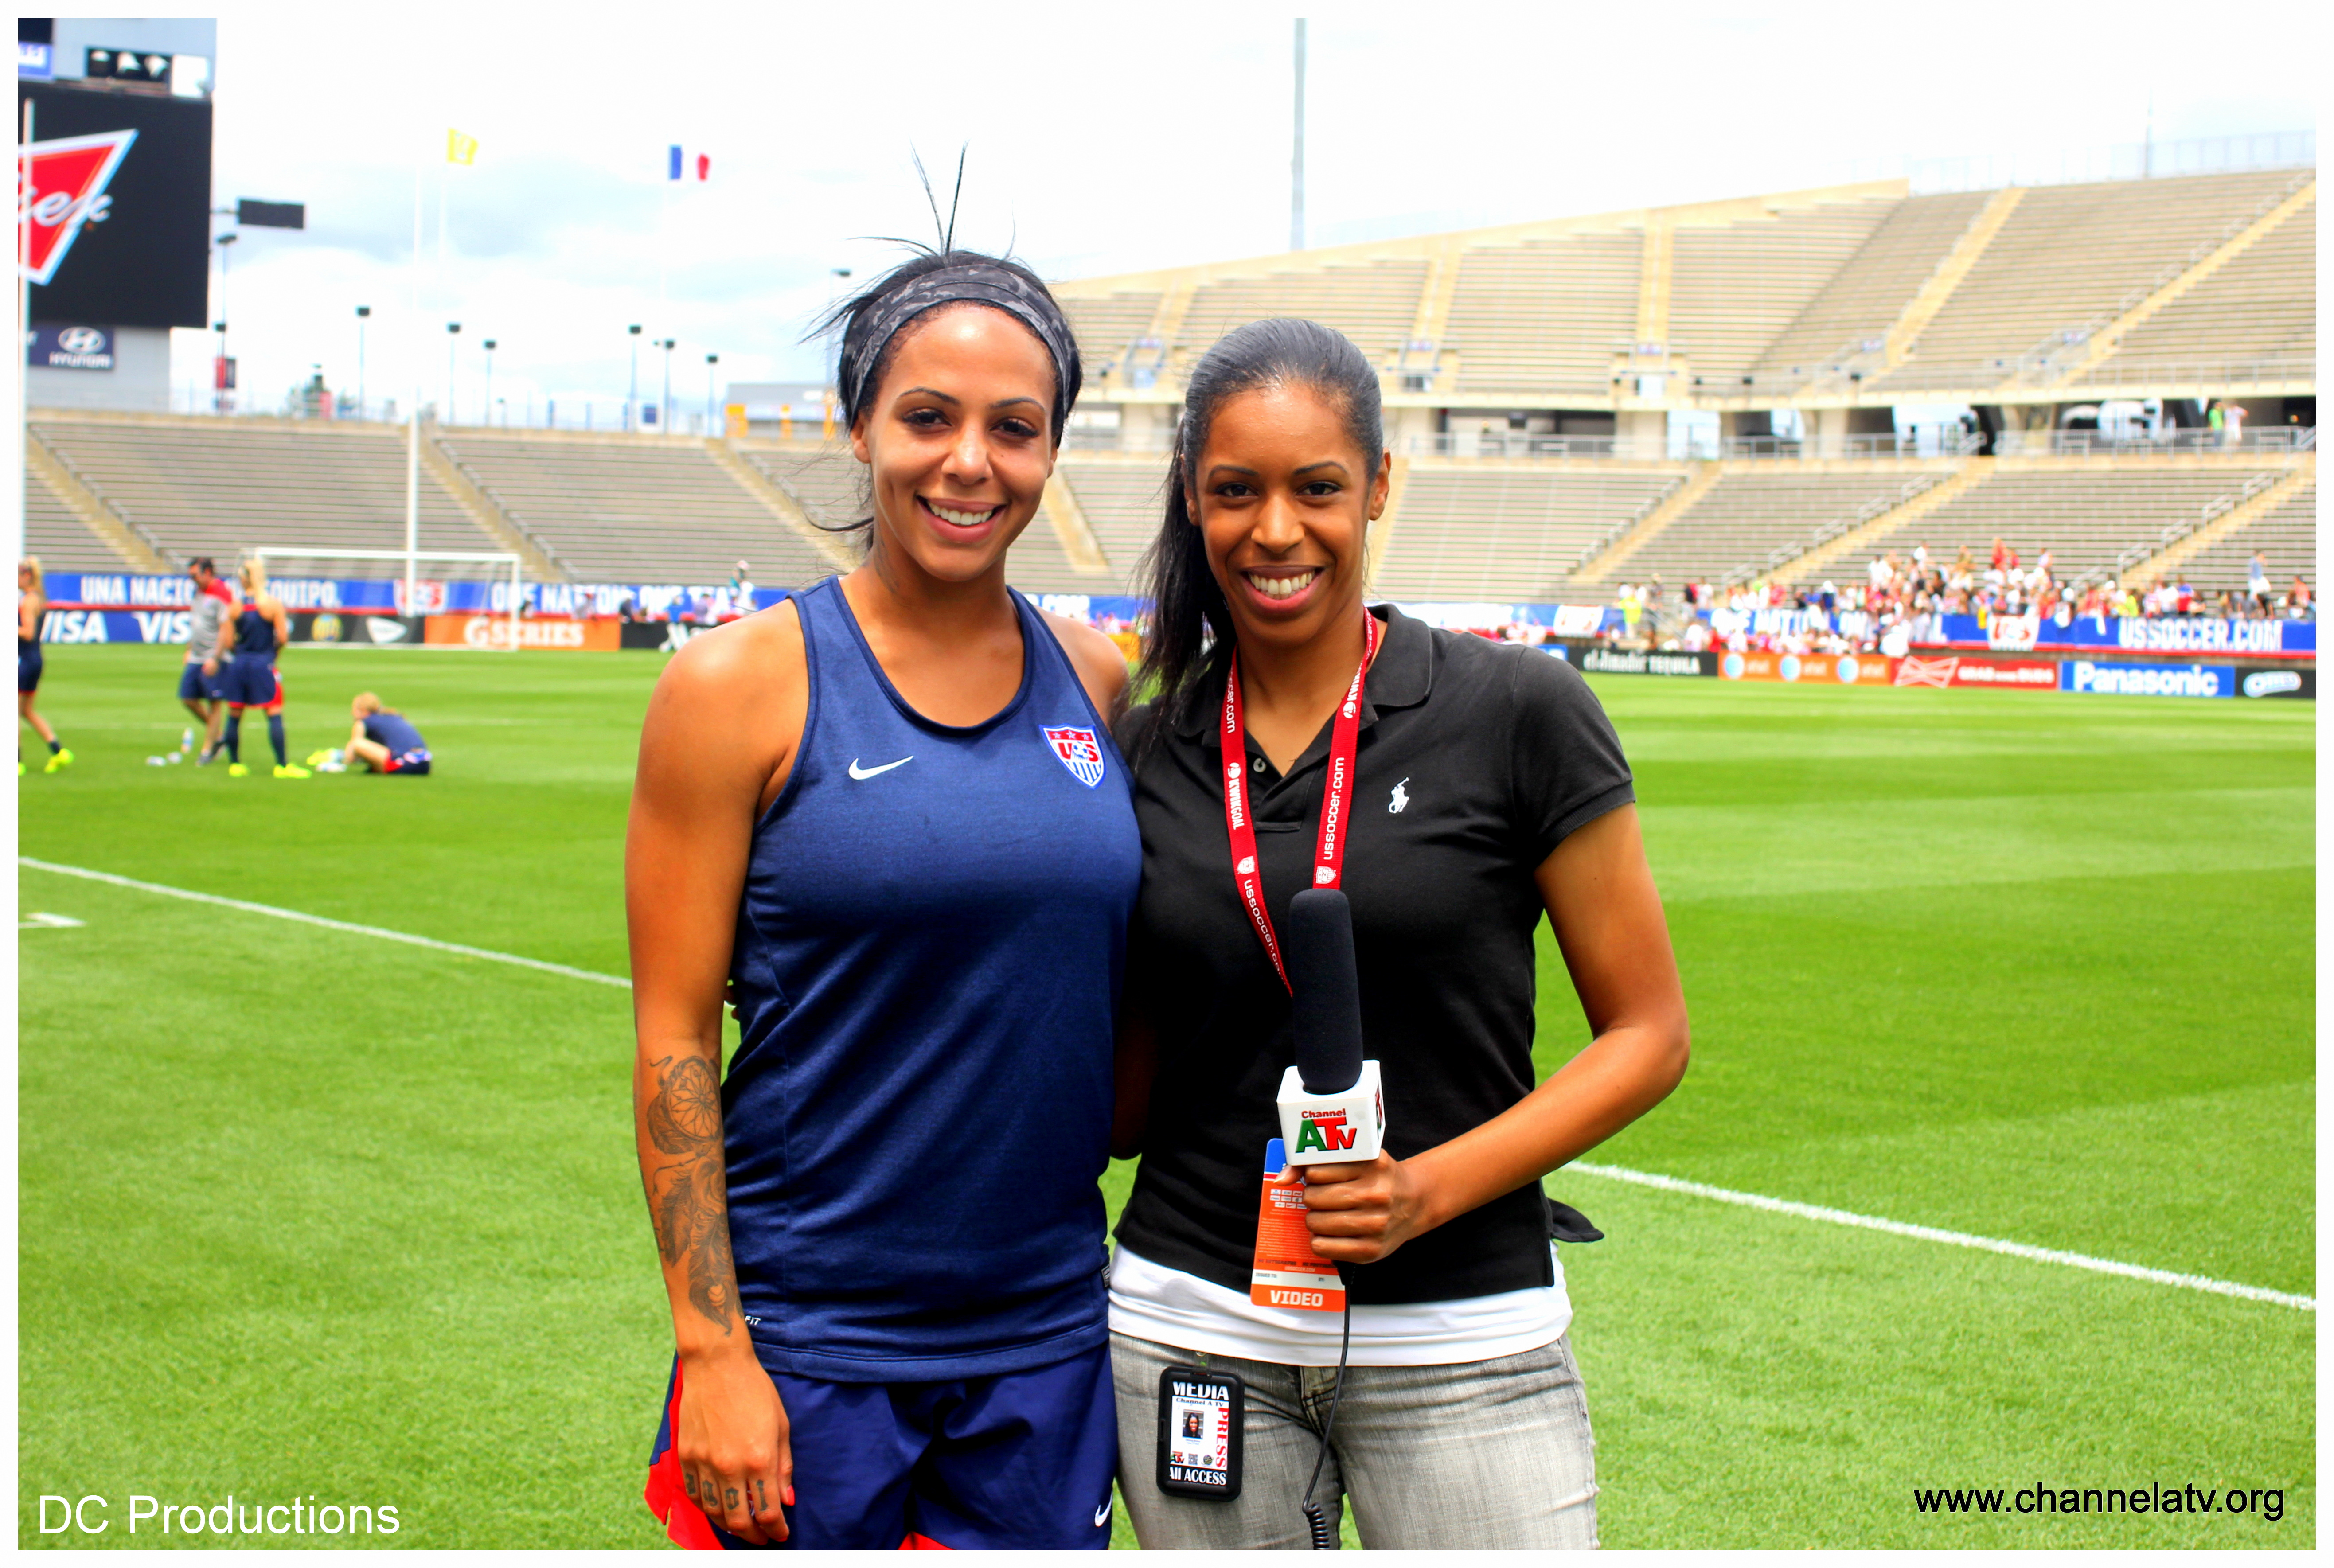 Sydney Leroux (USWNT) signs autographs for fans and talks to Channel ATV